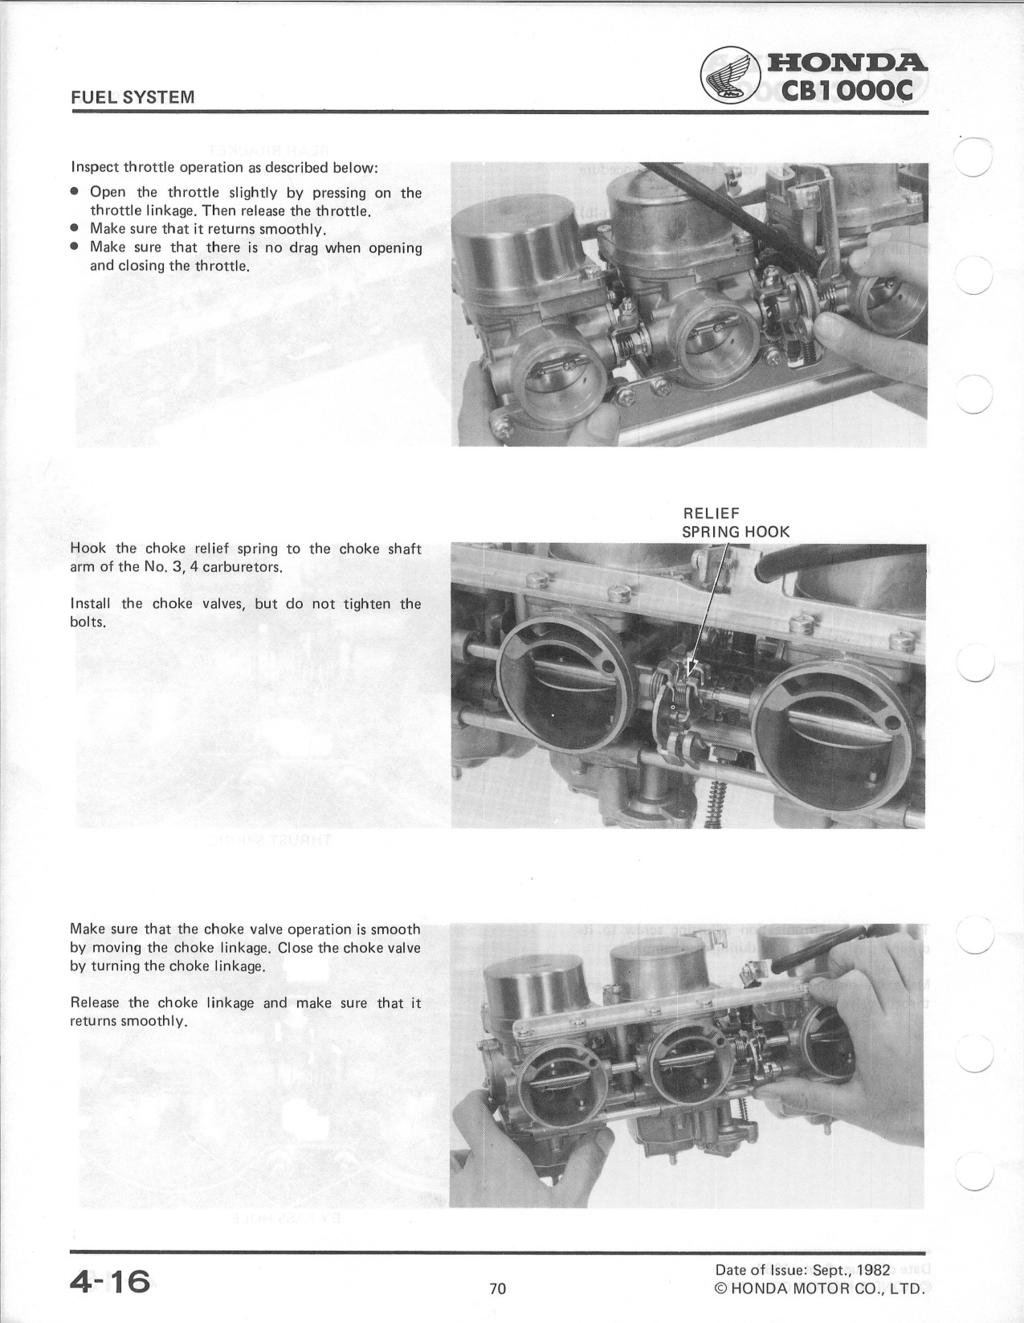 FUEL SYSTEM ~HONDA~ CB1000C Inspect throttle operation as described below: Open the throttle slightly by pressing on the throttle linkage. Then release the throttle.